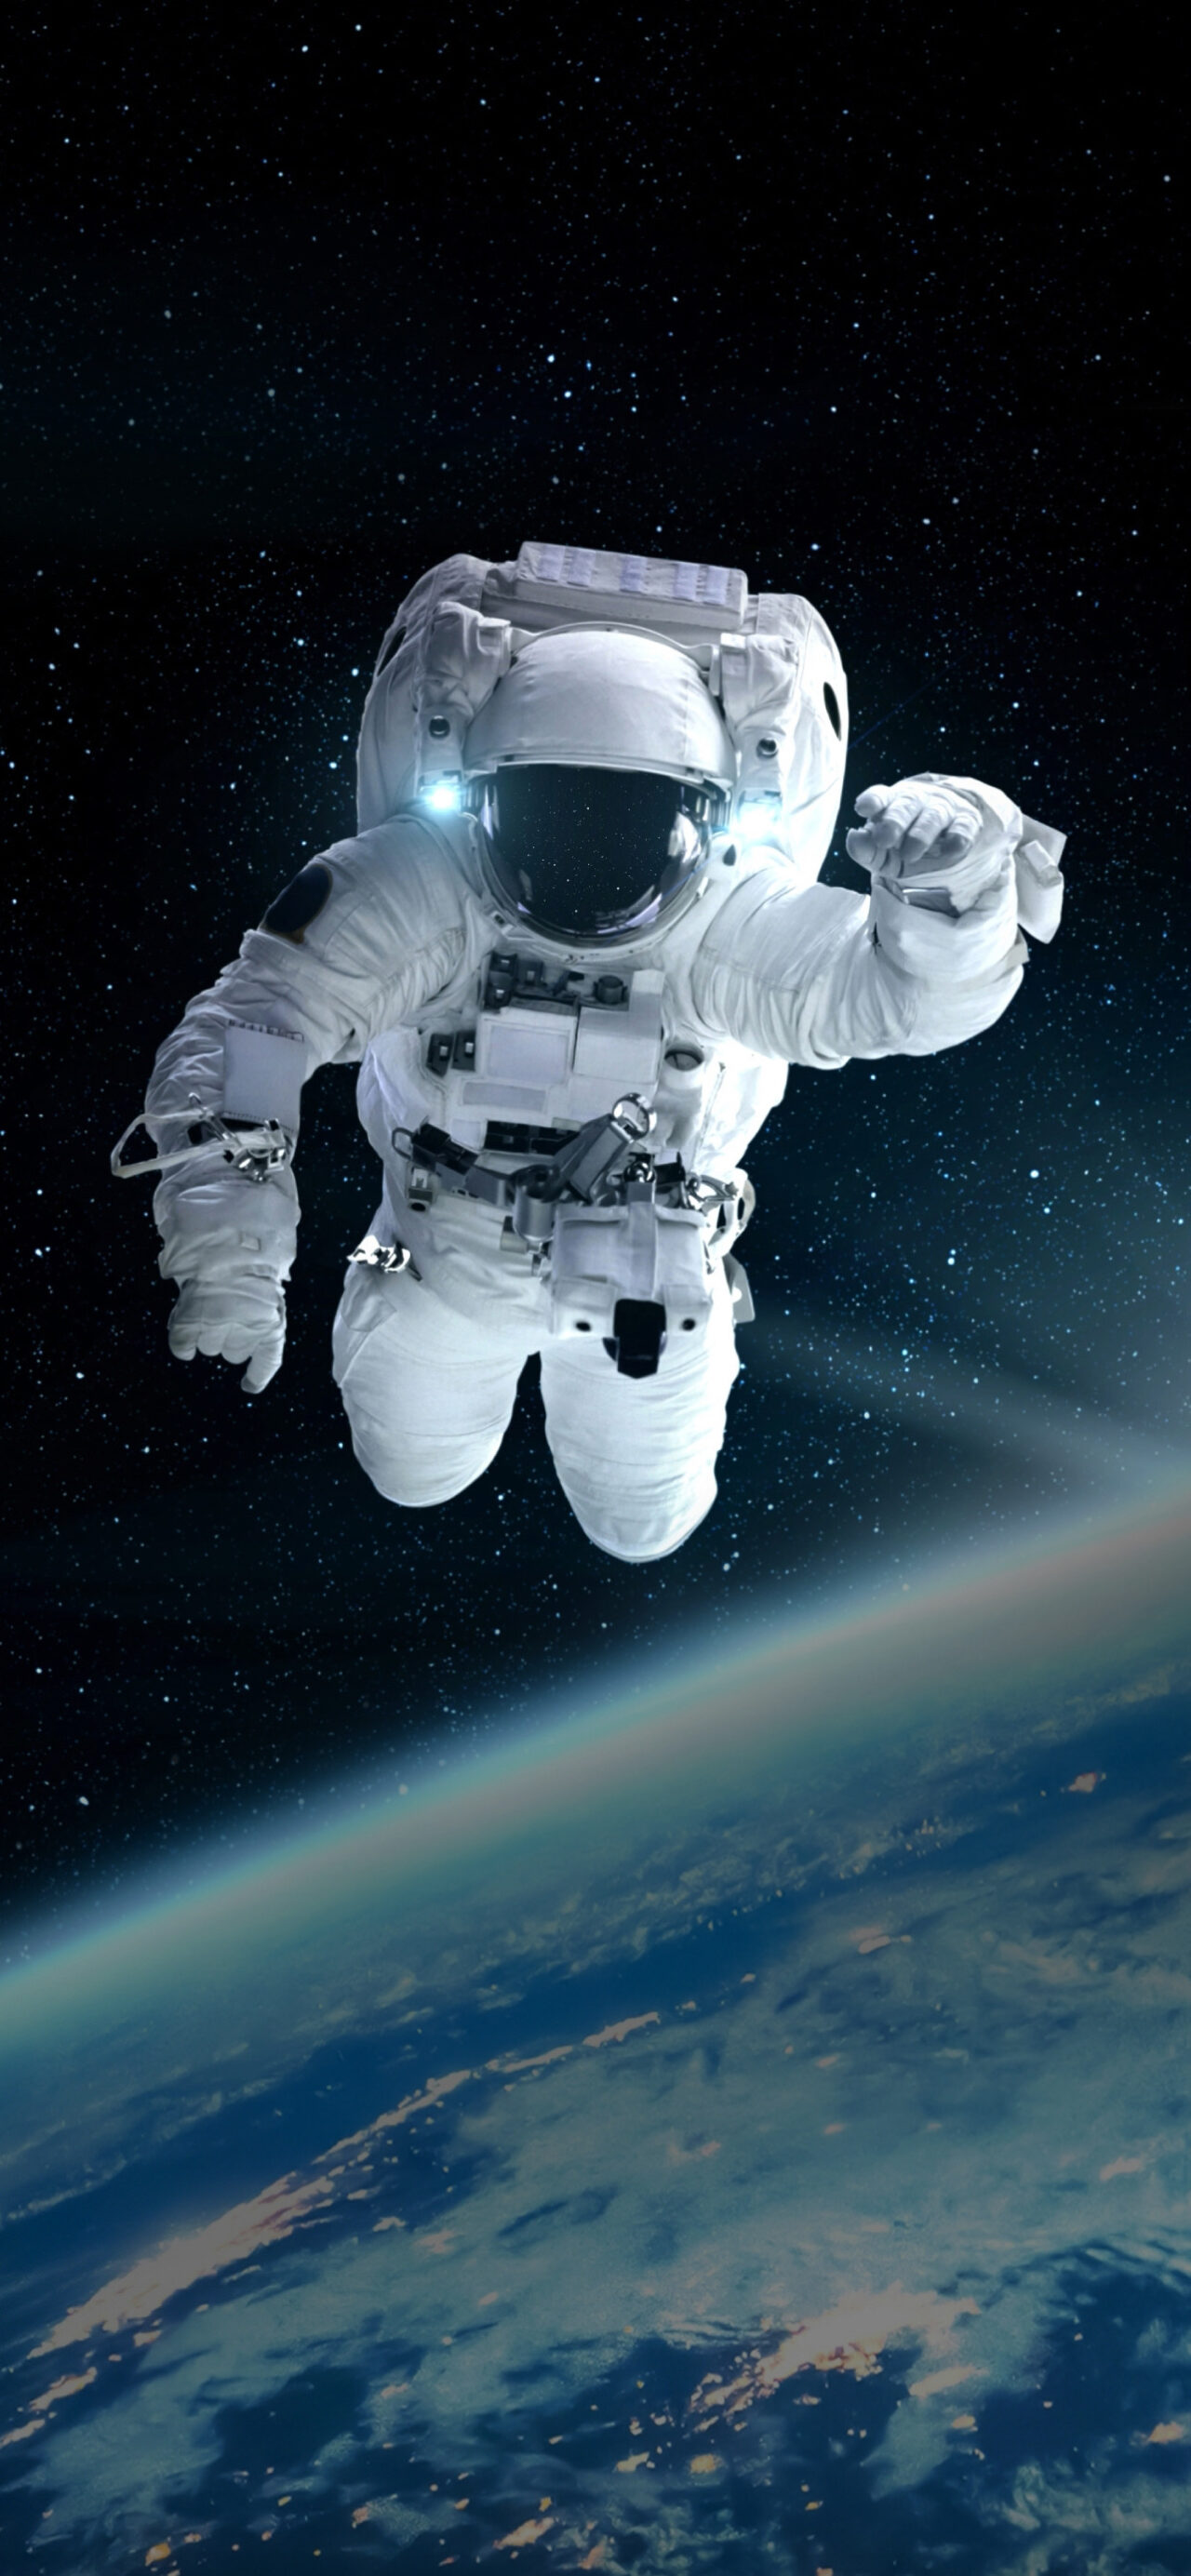 Astronaut in the Space | Depth Effect - Wallpapers Central